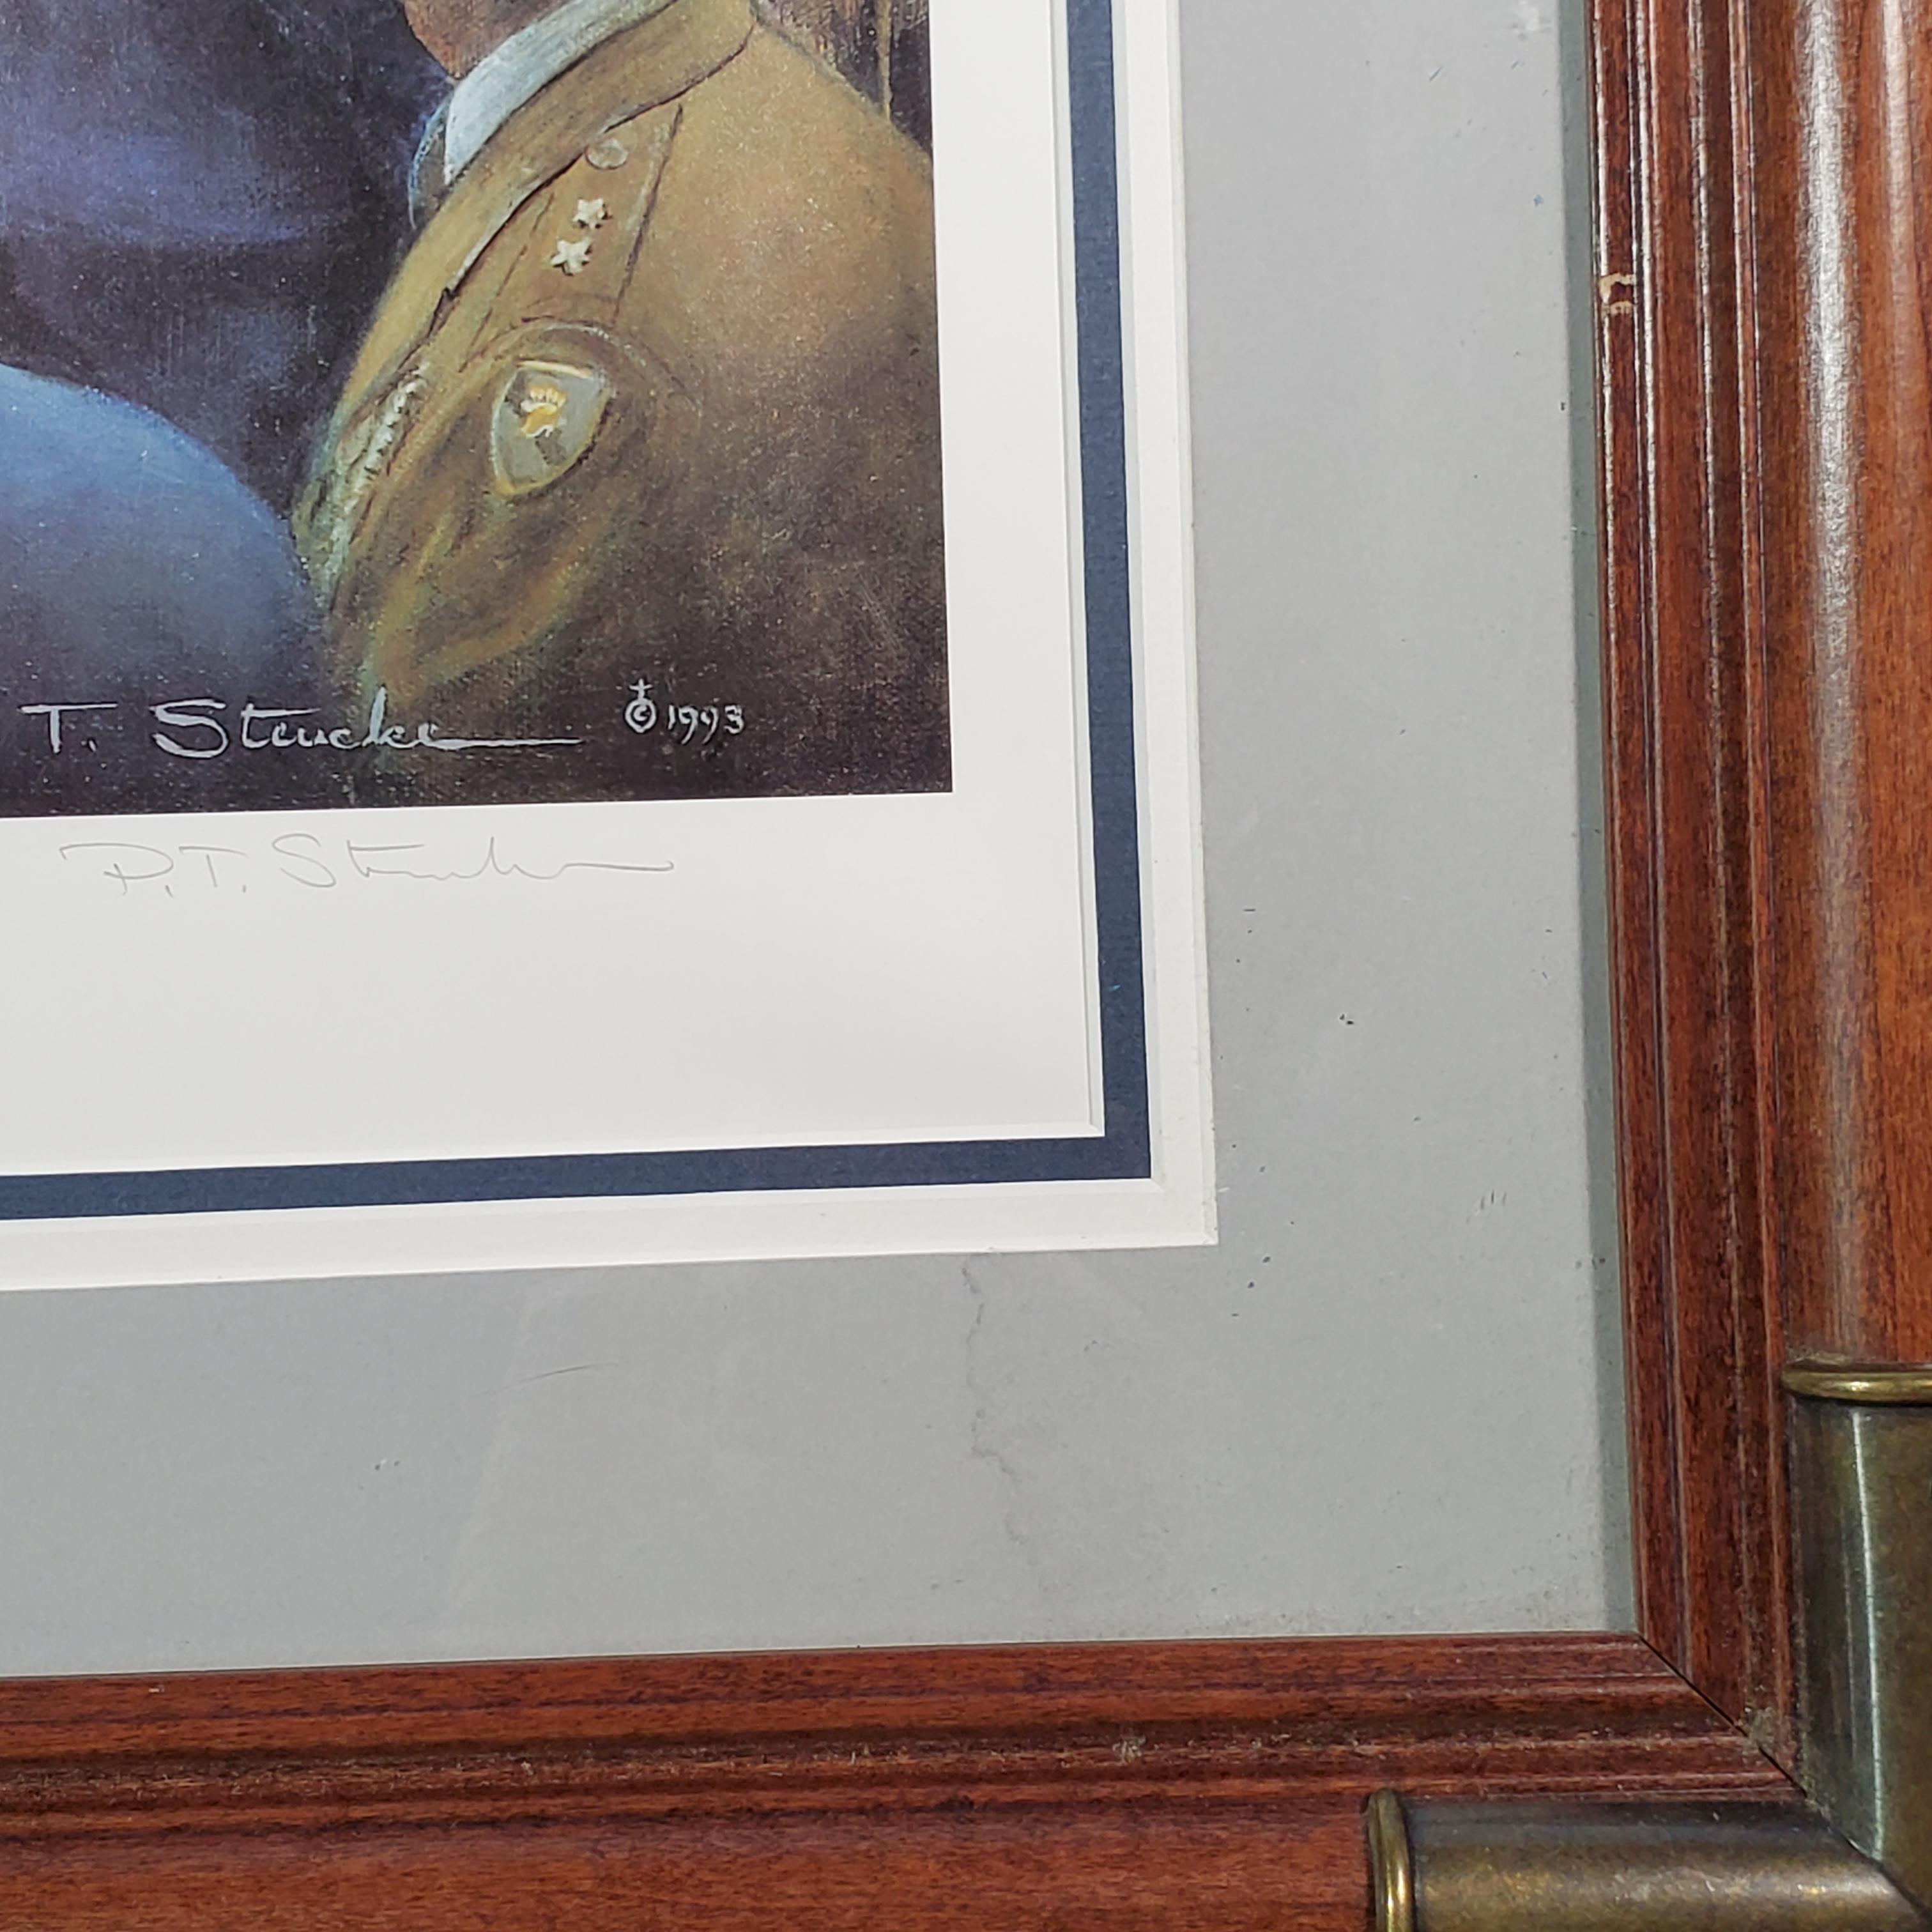 Paul Steucke 1993 Duty Honor Country West Point Print, Custom Framed, LE Signed And Numbered